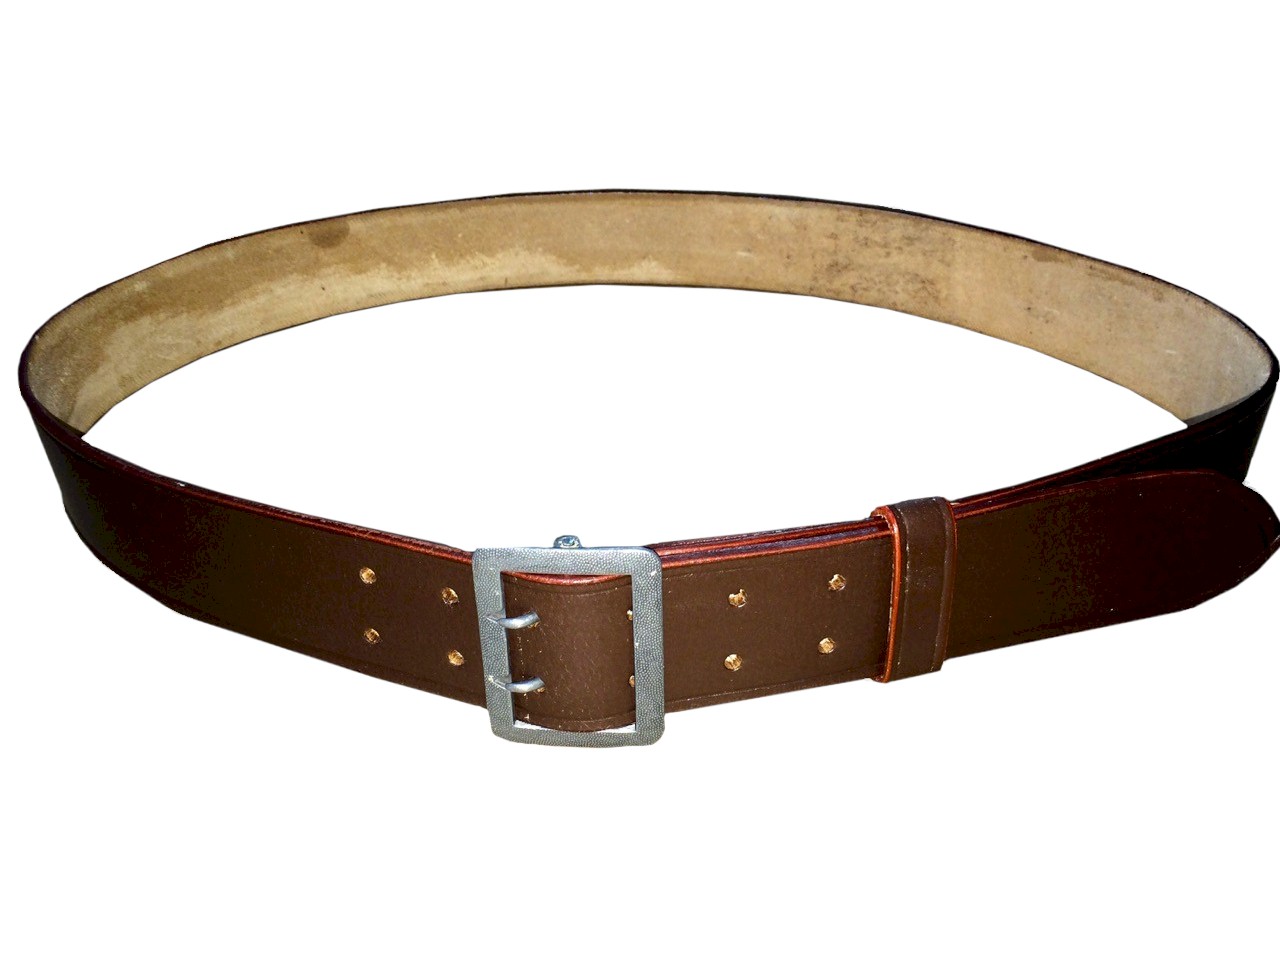 WW11 GERMAN OFFICERS LUFTWAFFE OR ARMY BROWN LEATHER BELT